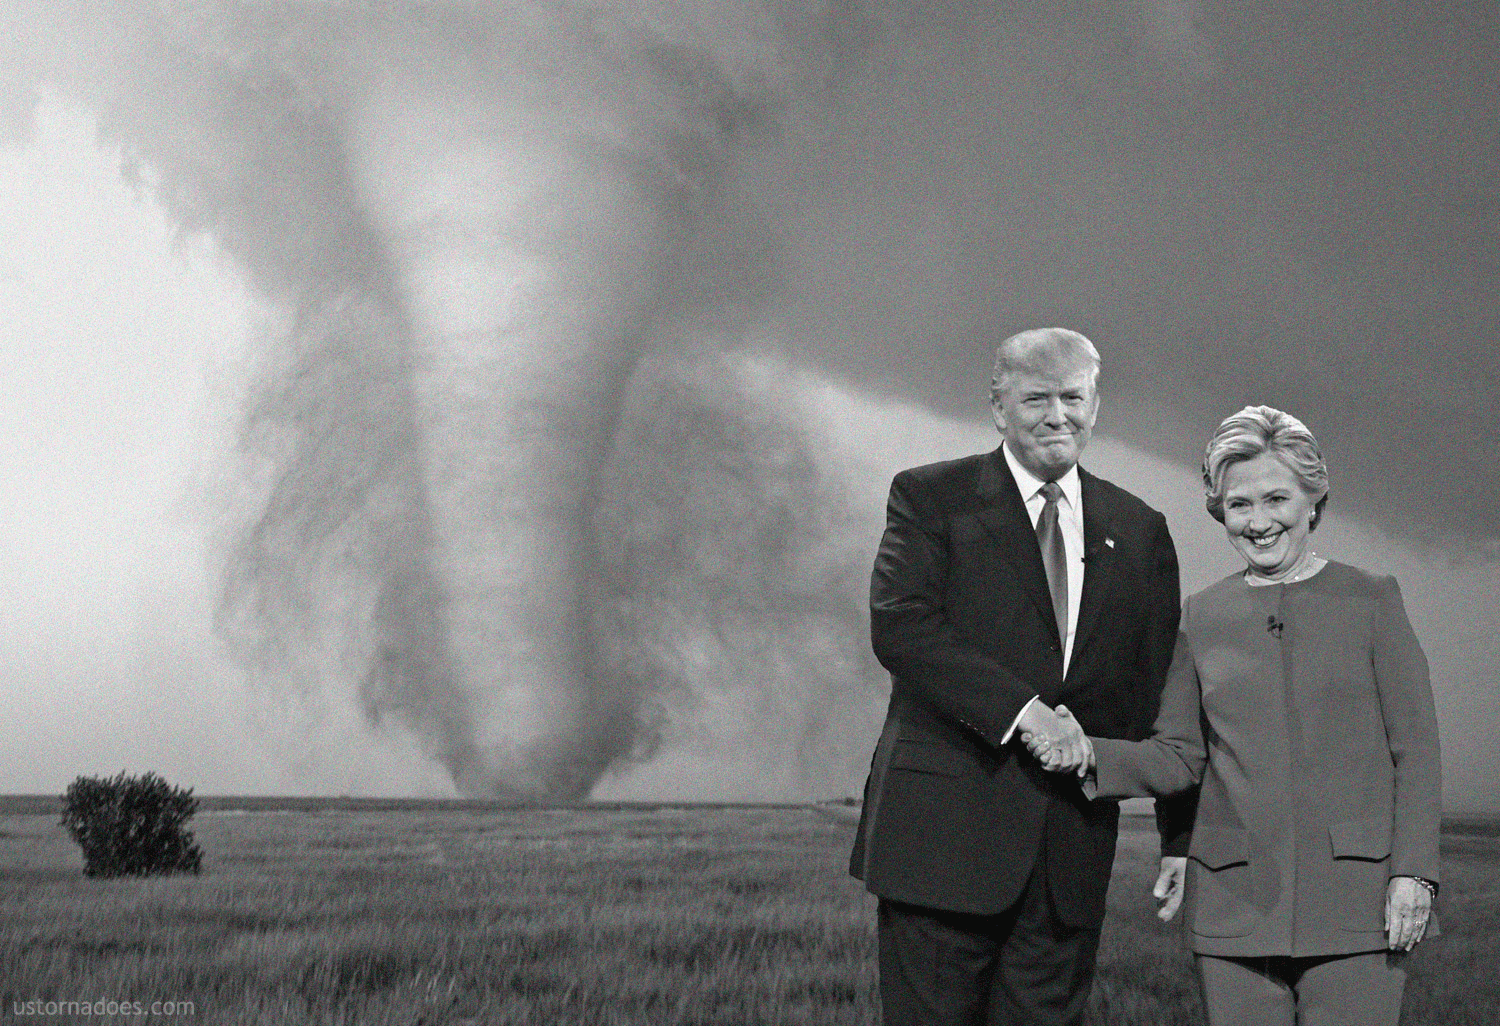 are-tornado-selfies-unethical